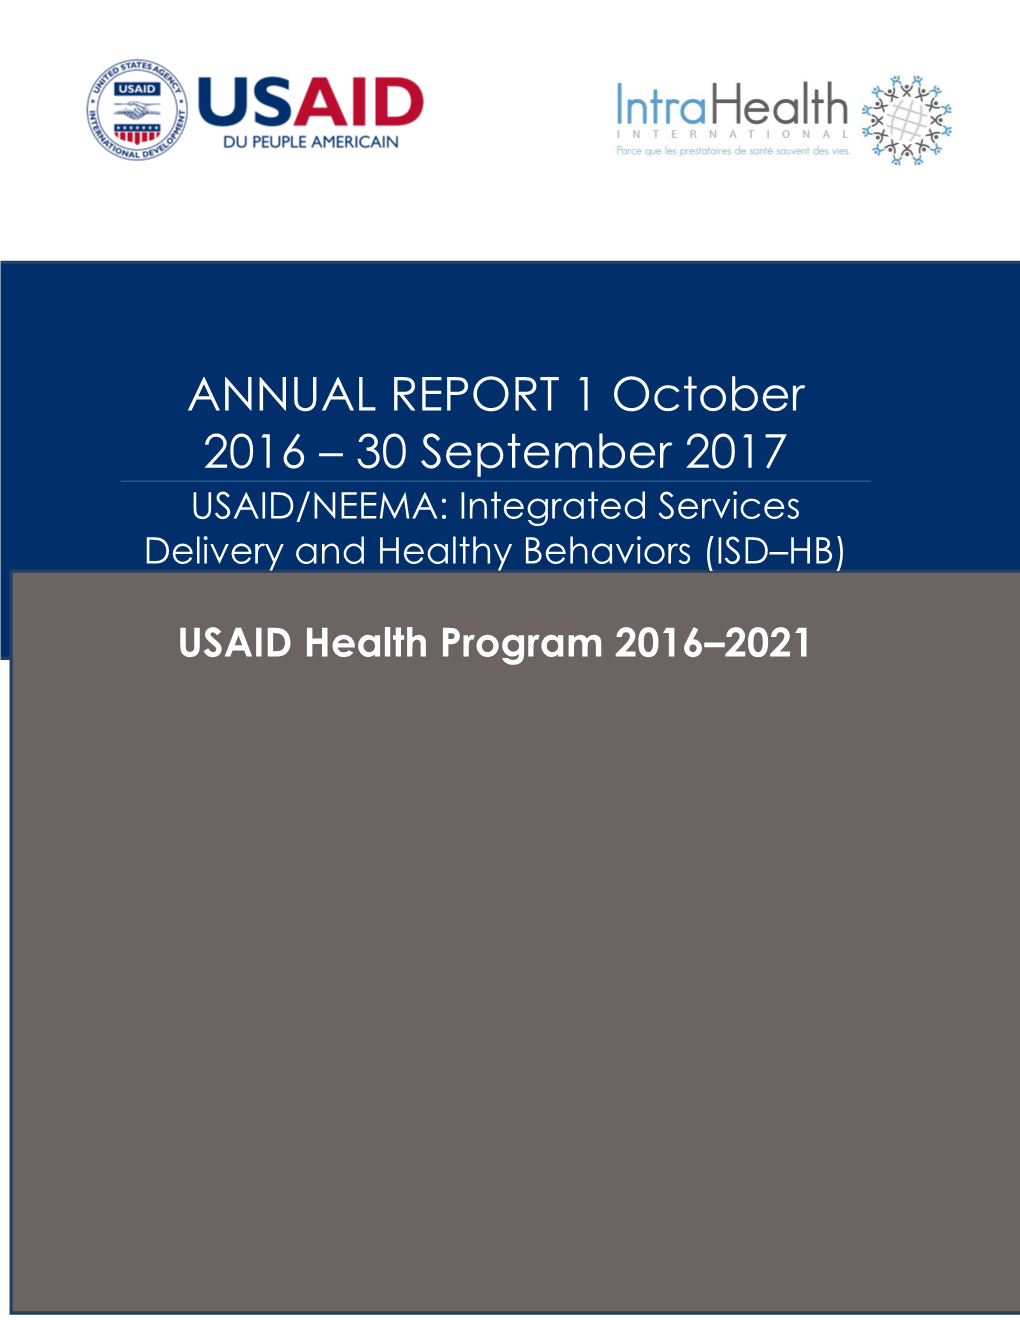 ANNUAL REPORT 1 October 2016 – 30 September 2017 USAID/NEEMA: Integrated Services Delivery and Healthy Behaviors (ISD–HB)